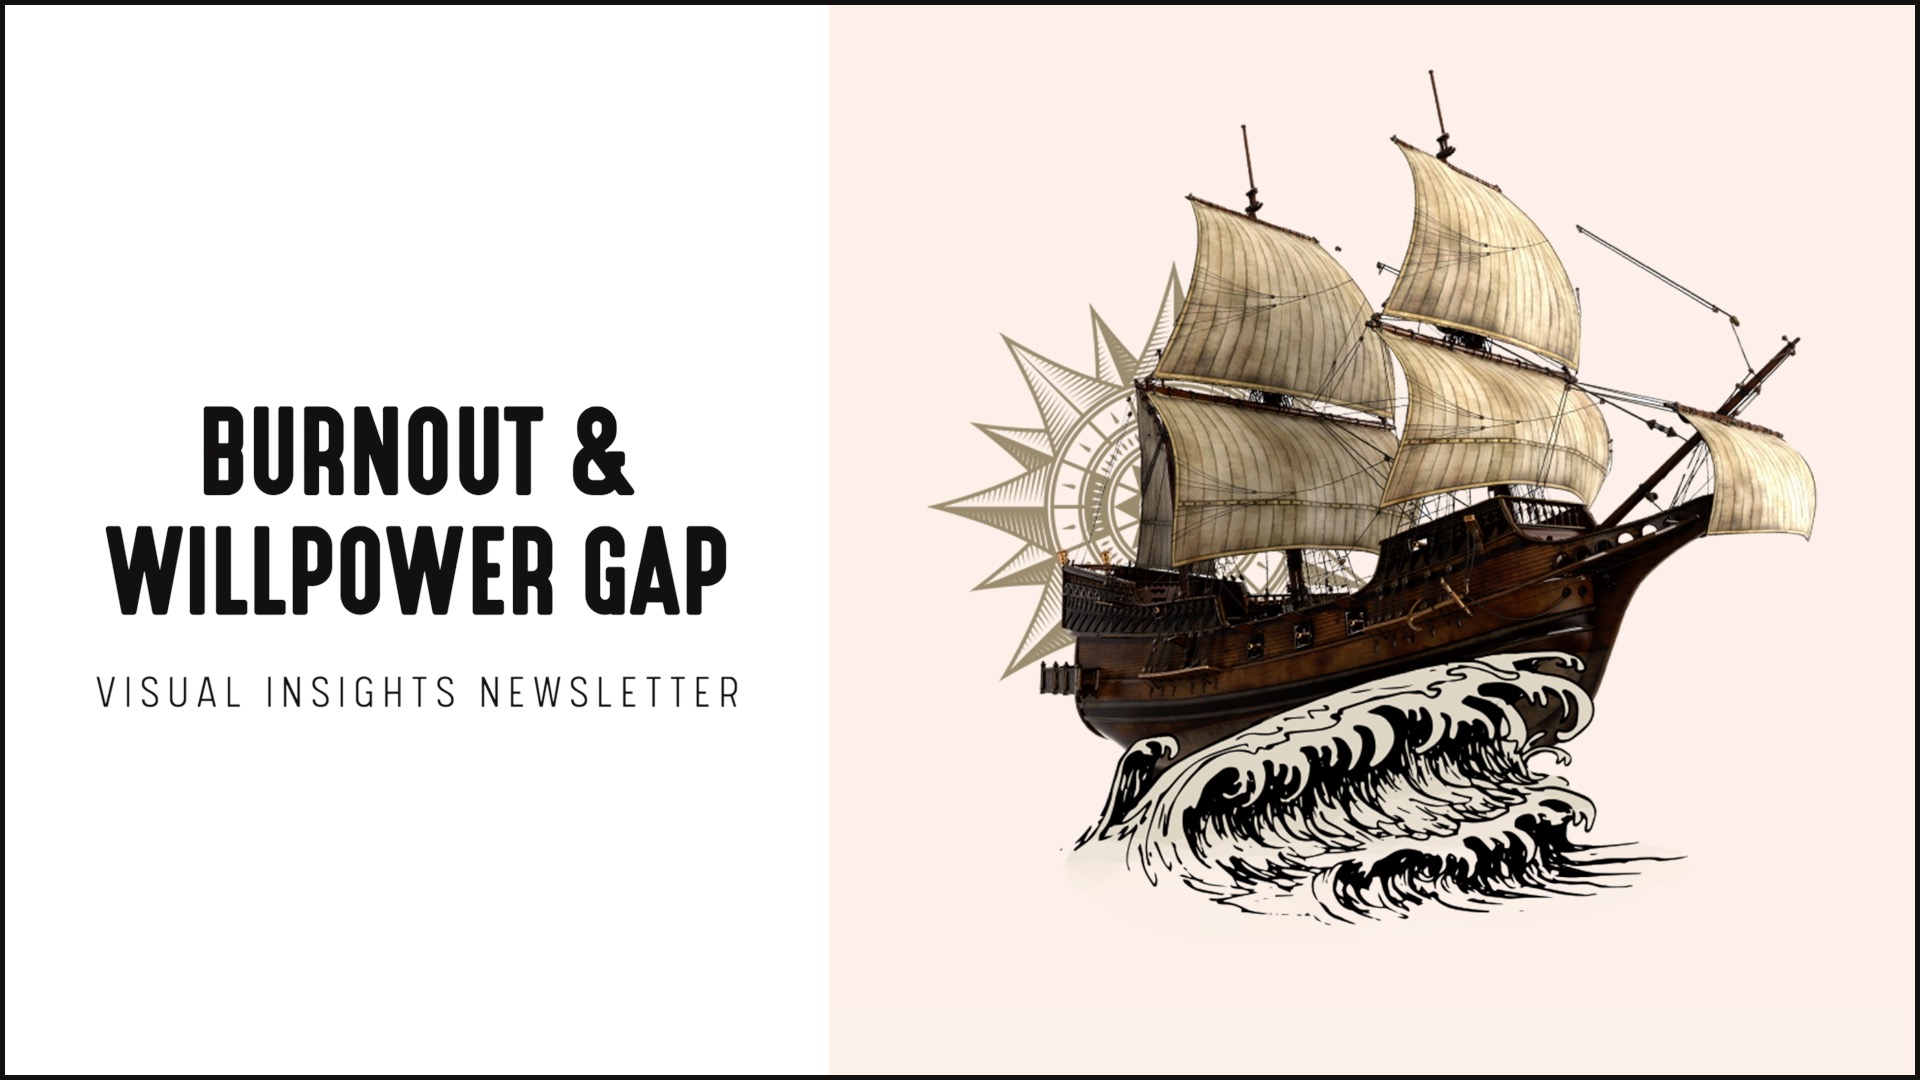 [NEW] Burnout & Willpower Gap - Visual Insights Newsletter Marketing Campaigns for Financial Advisors